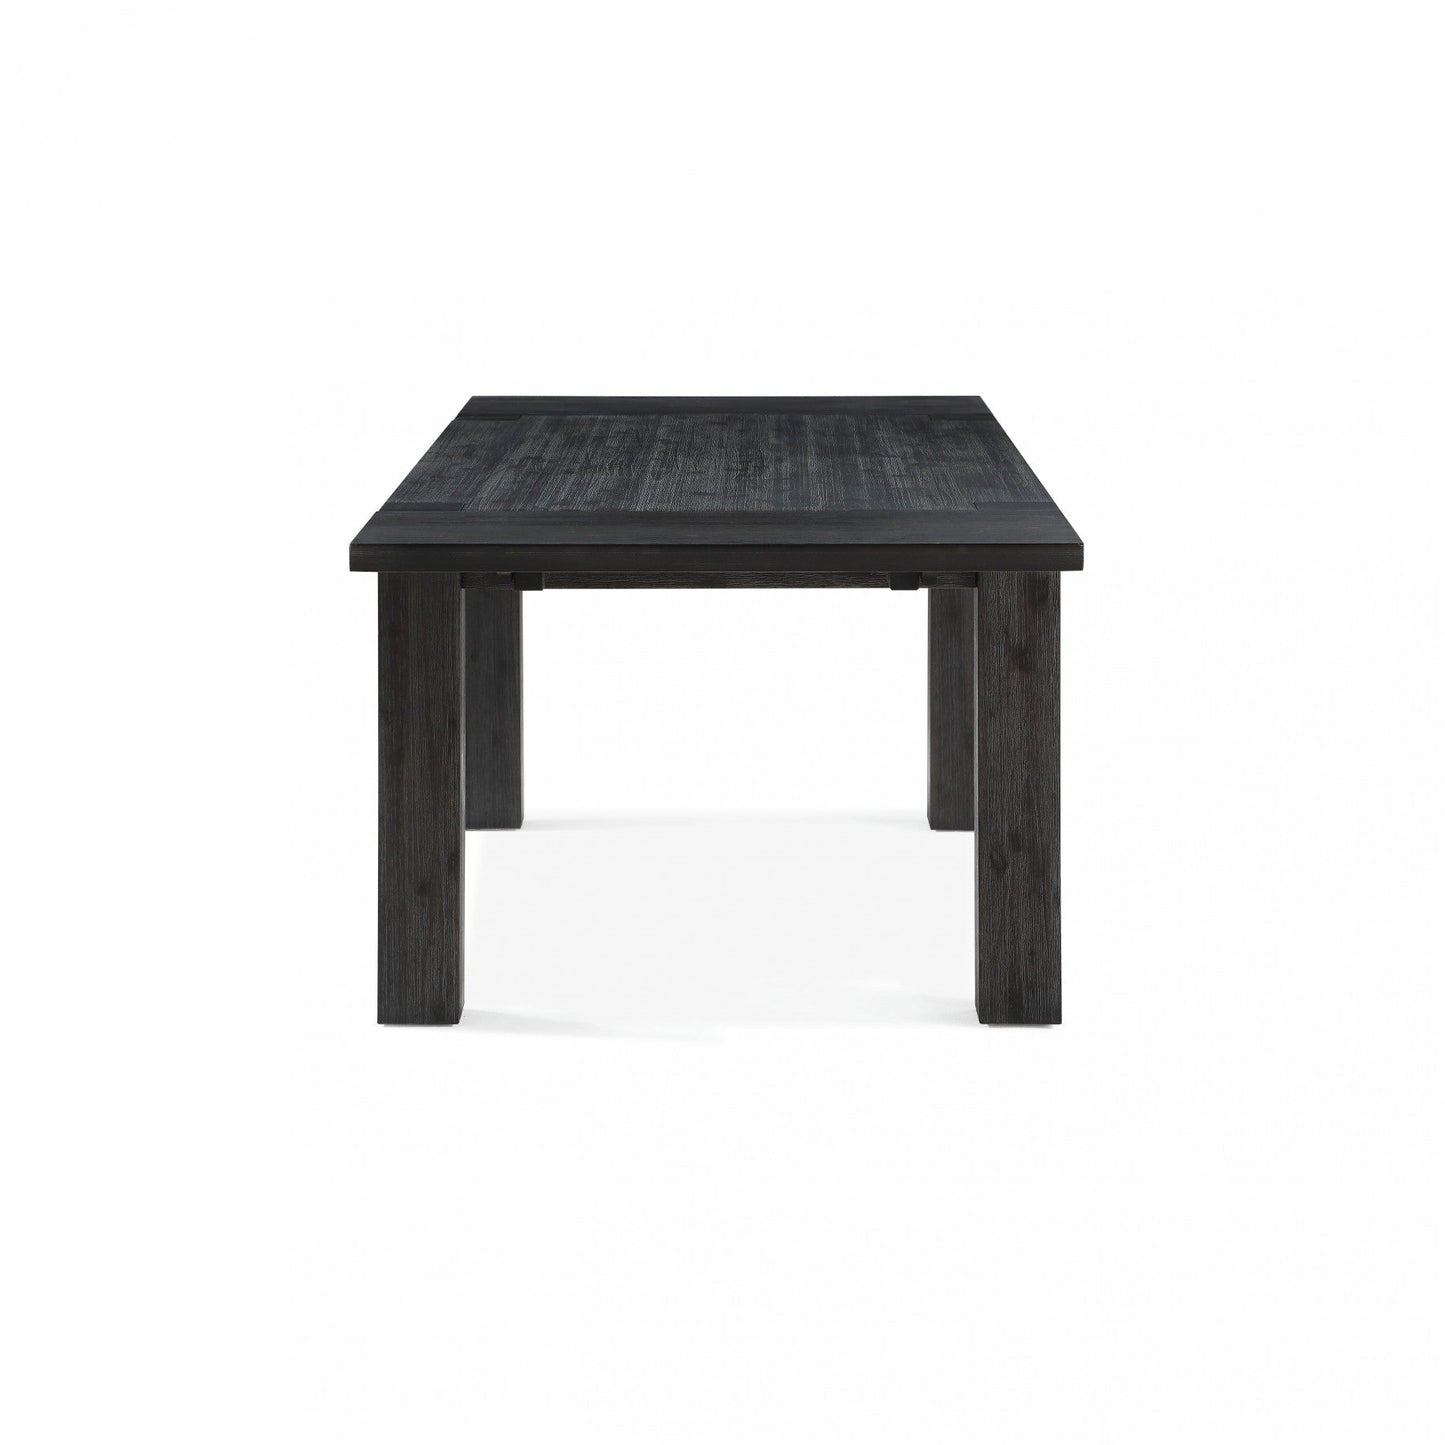 Modus Meadow Rectangular Table in Graphite